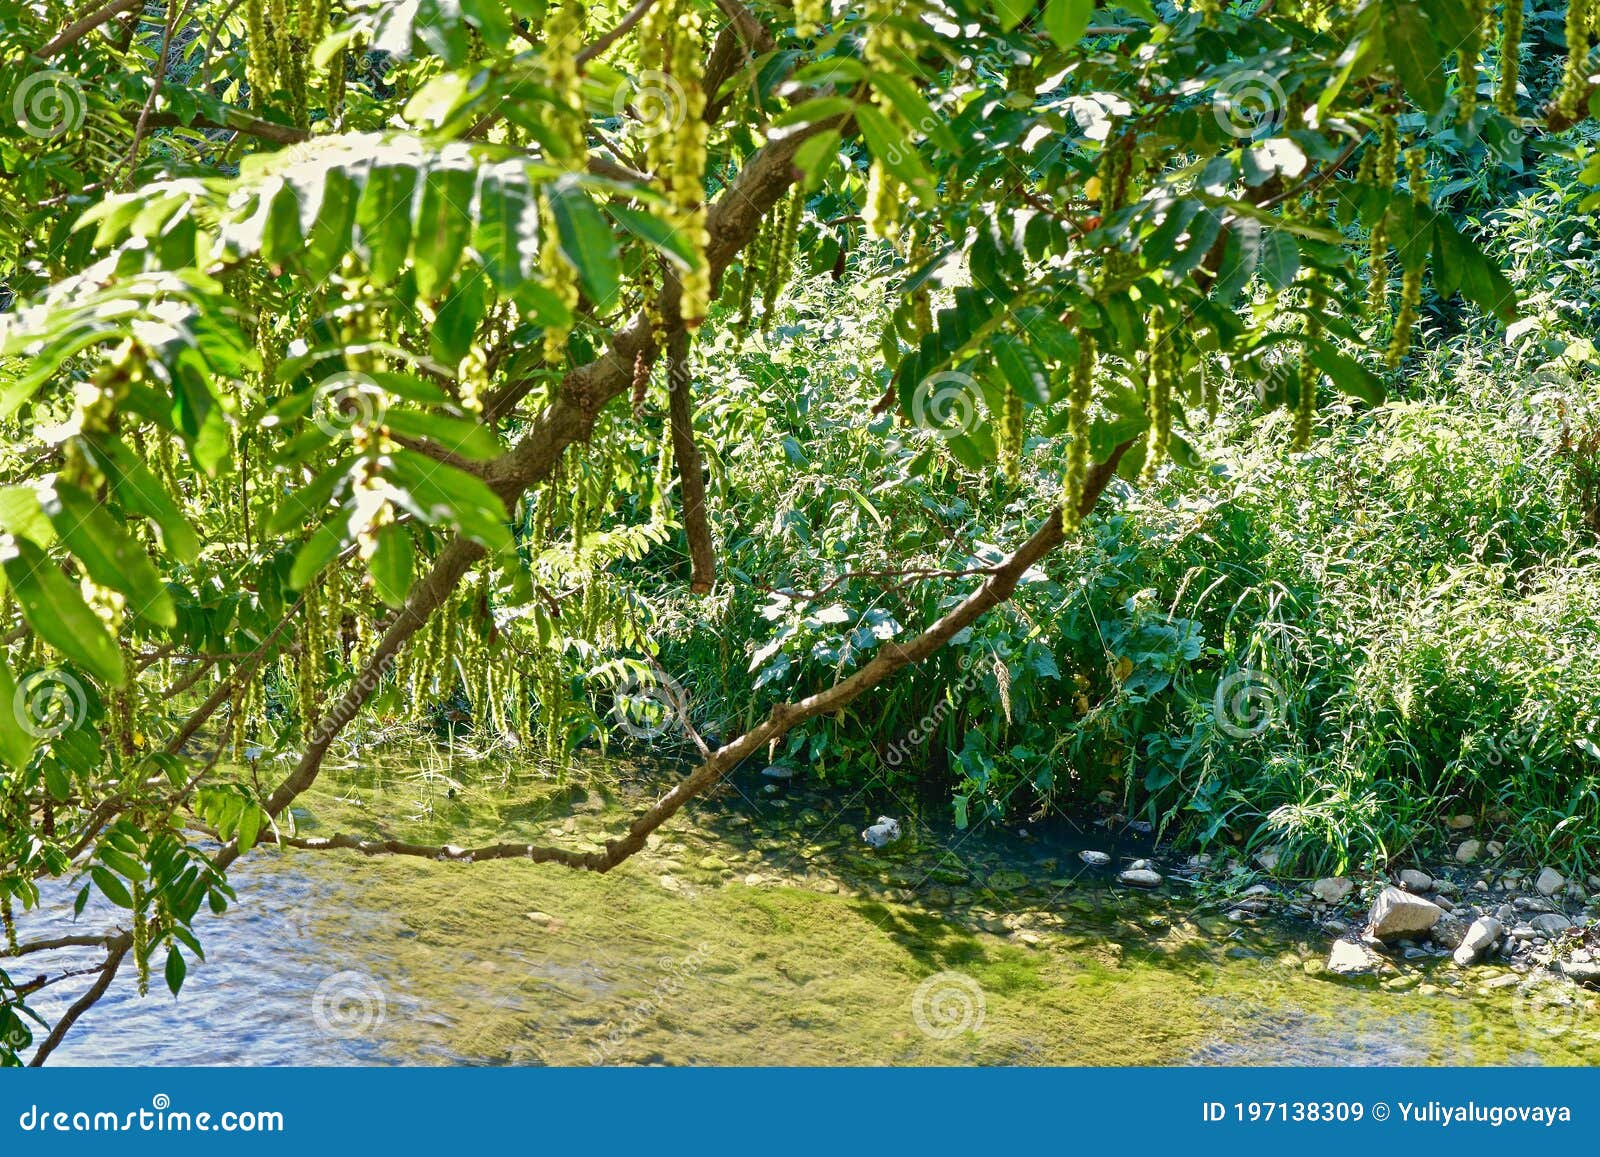 Green Clear Water in a Shallow River with Fish Surrounded by Vegetation ...